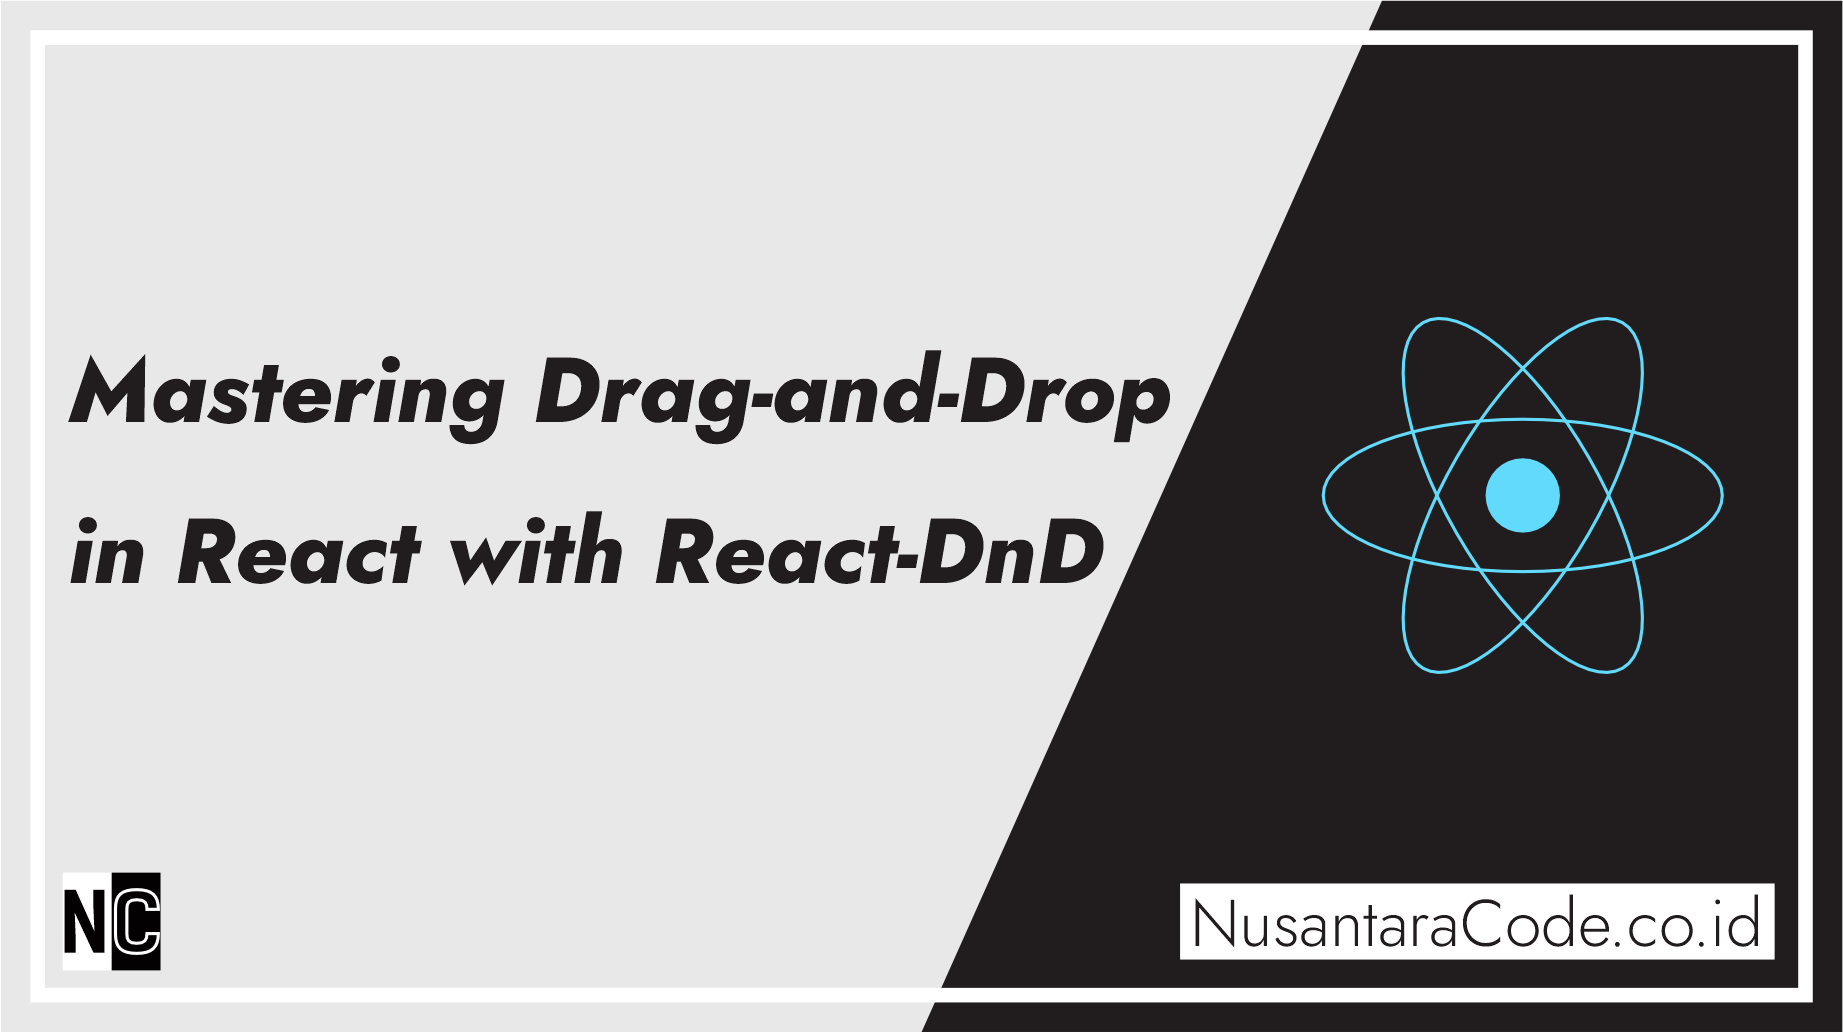 Mastering Drag-and-Drop in React with React-DnD